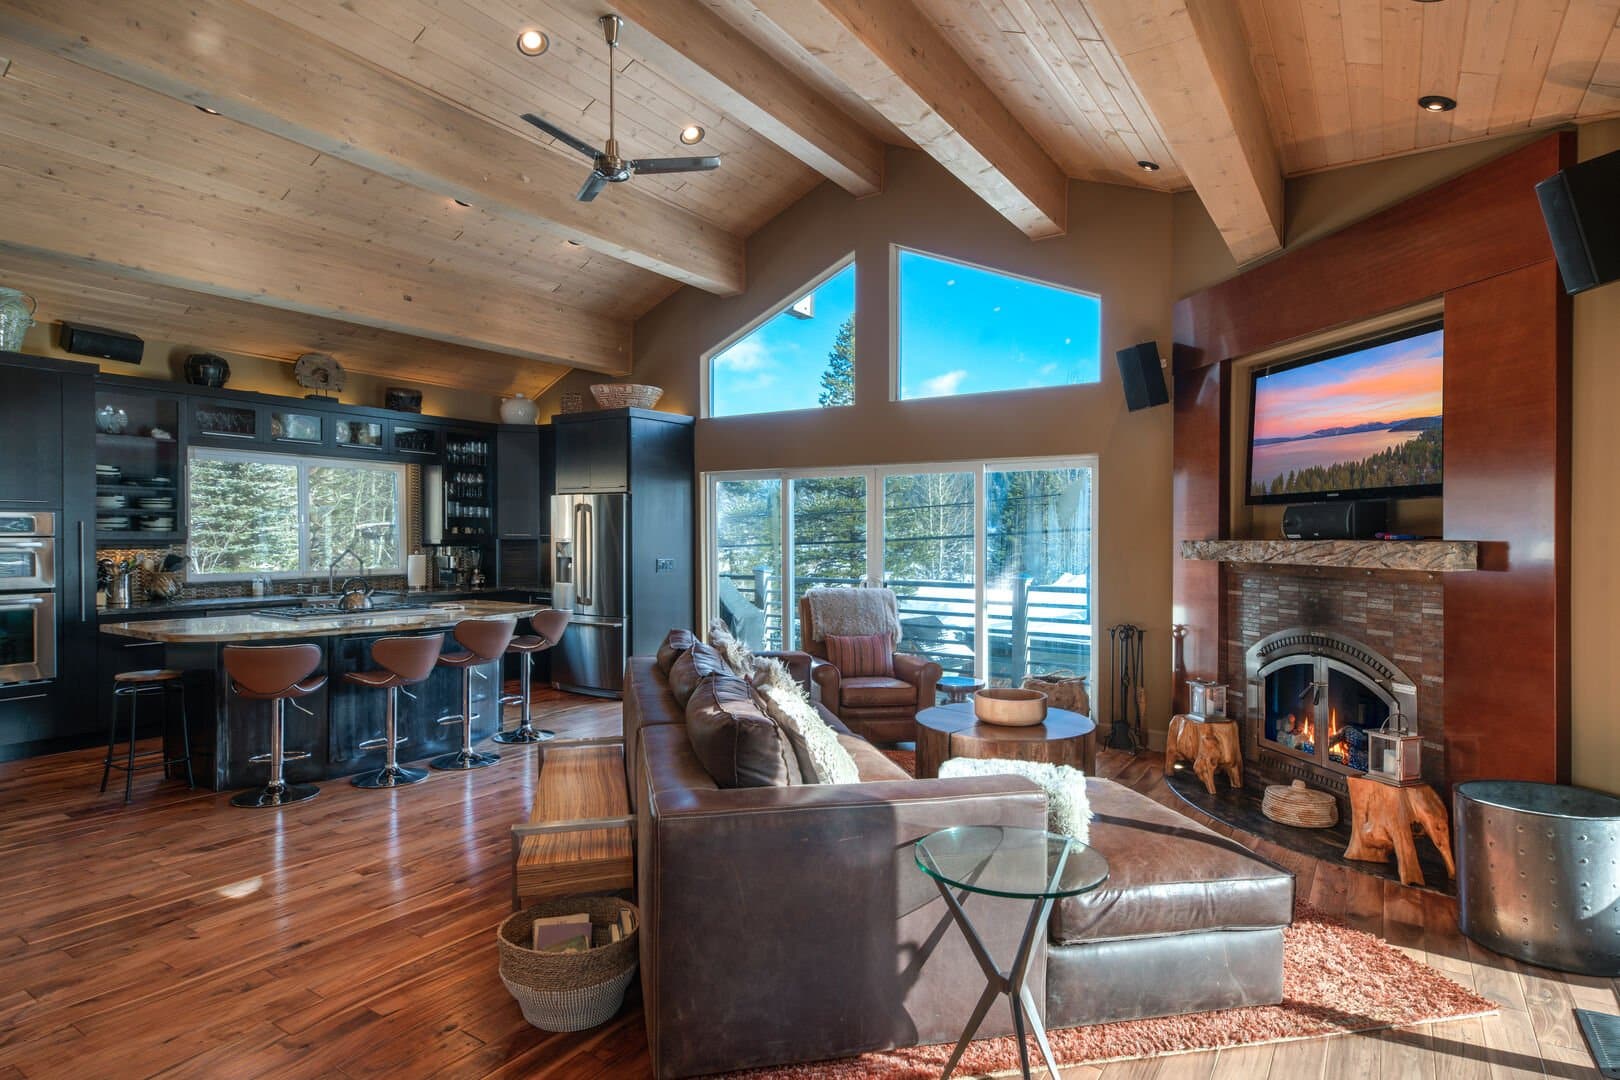 The living room in this Lake Tahoe rental property